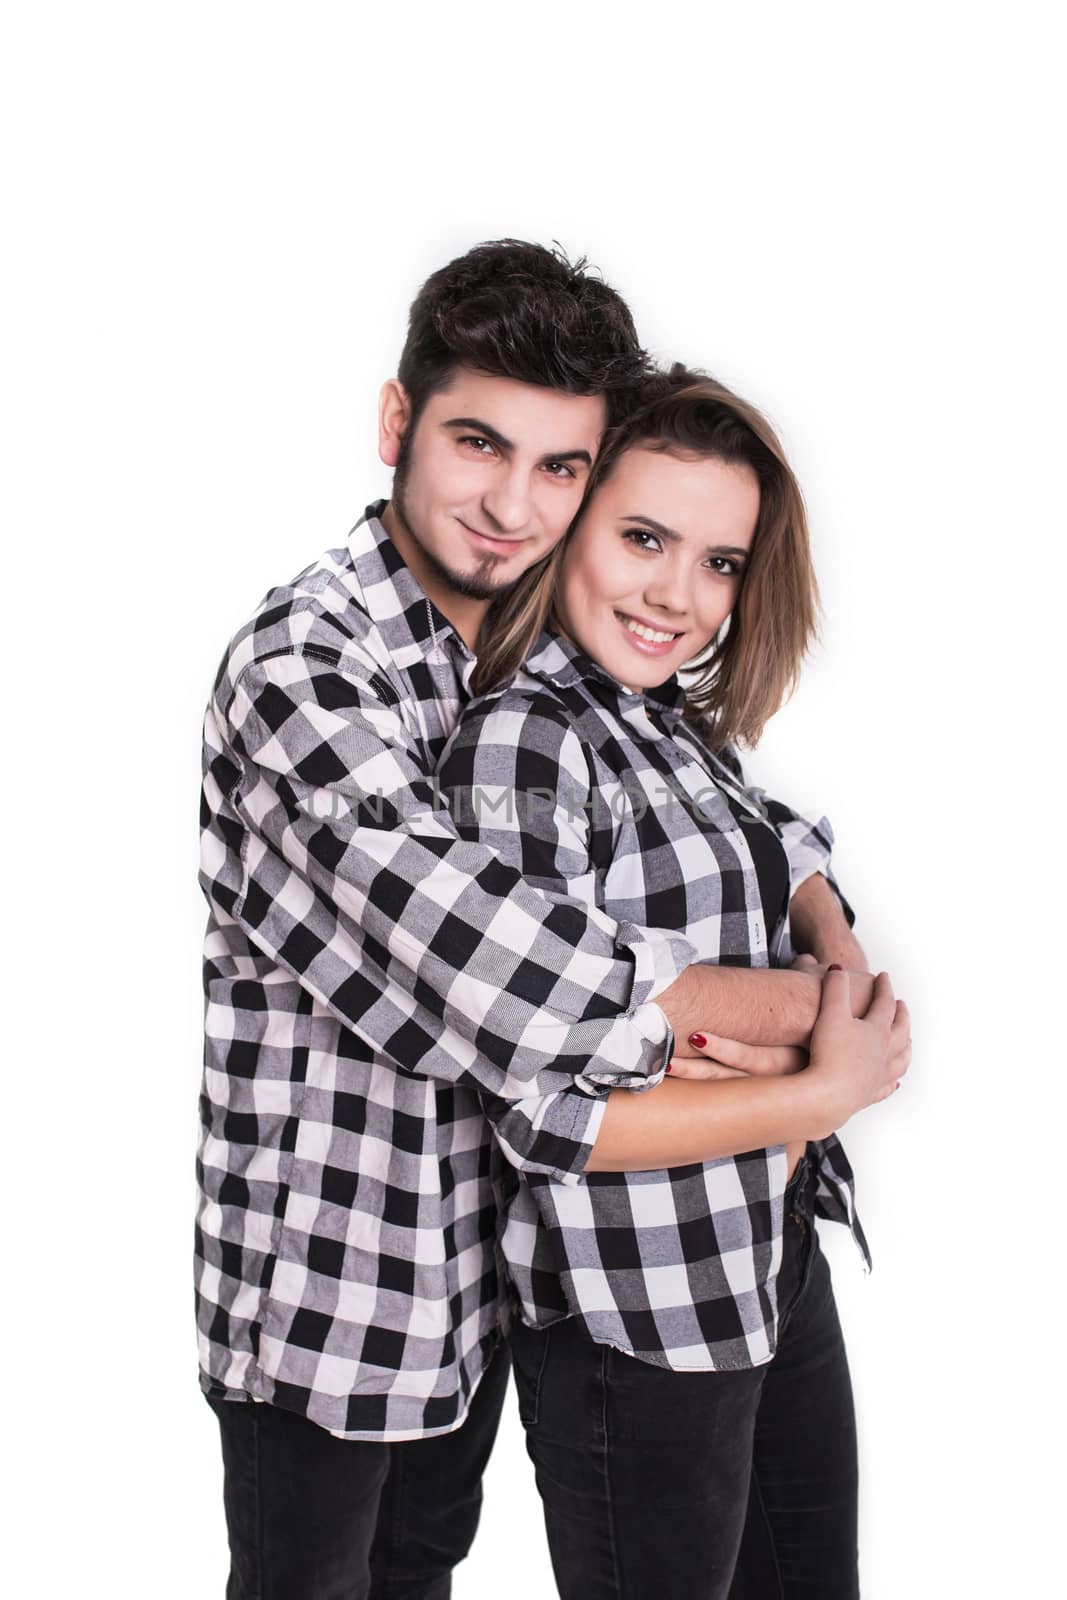 Happy young couple embracing each other isolated on white background